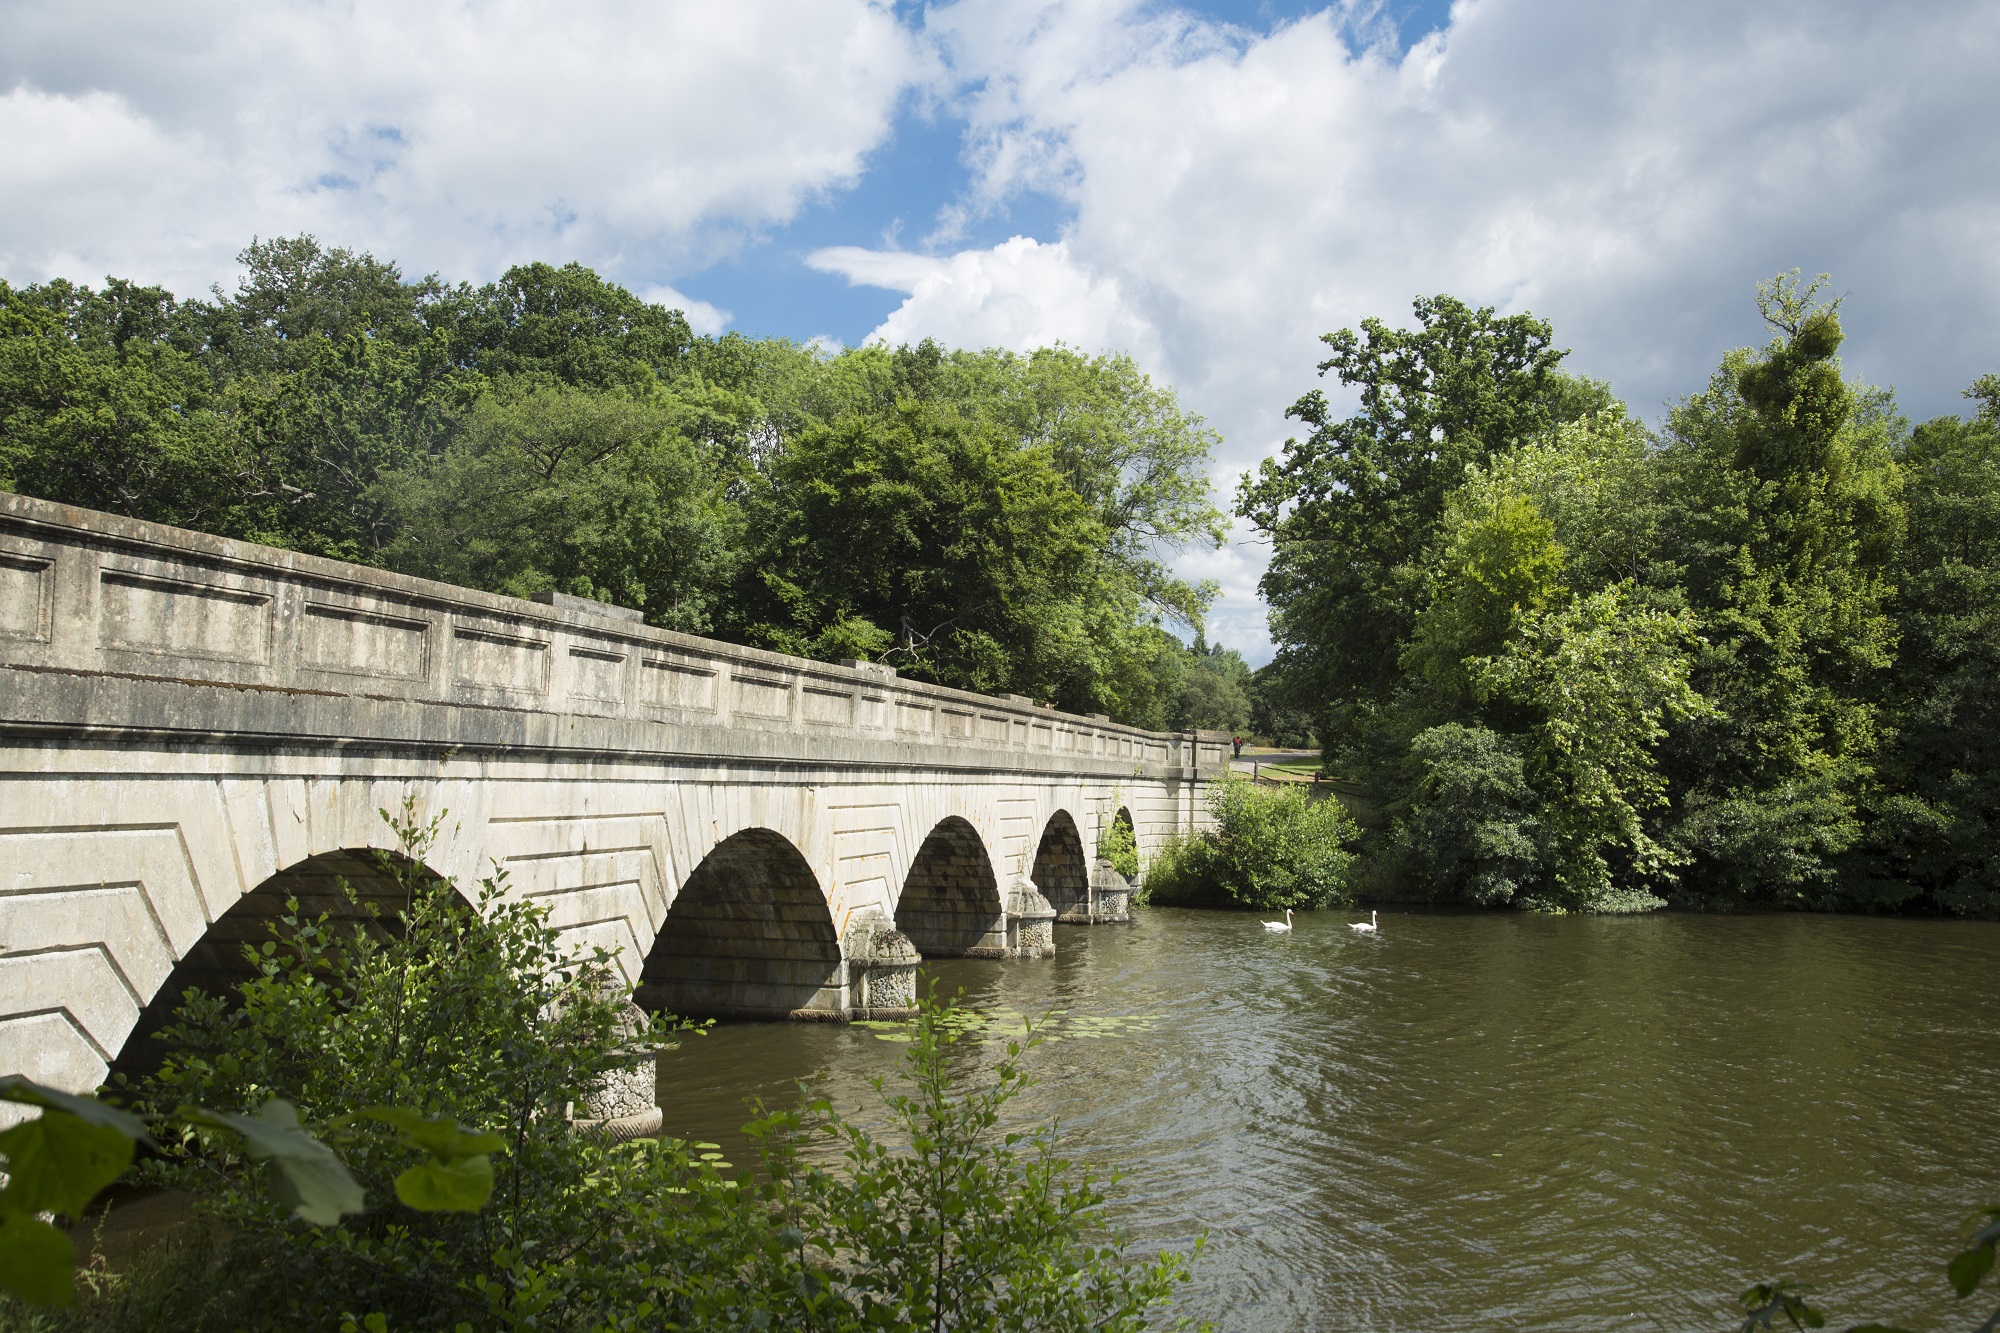 Five Arch Bridge at Virginia Water Lake with trees in the background.